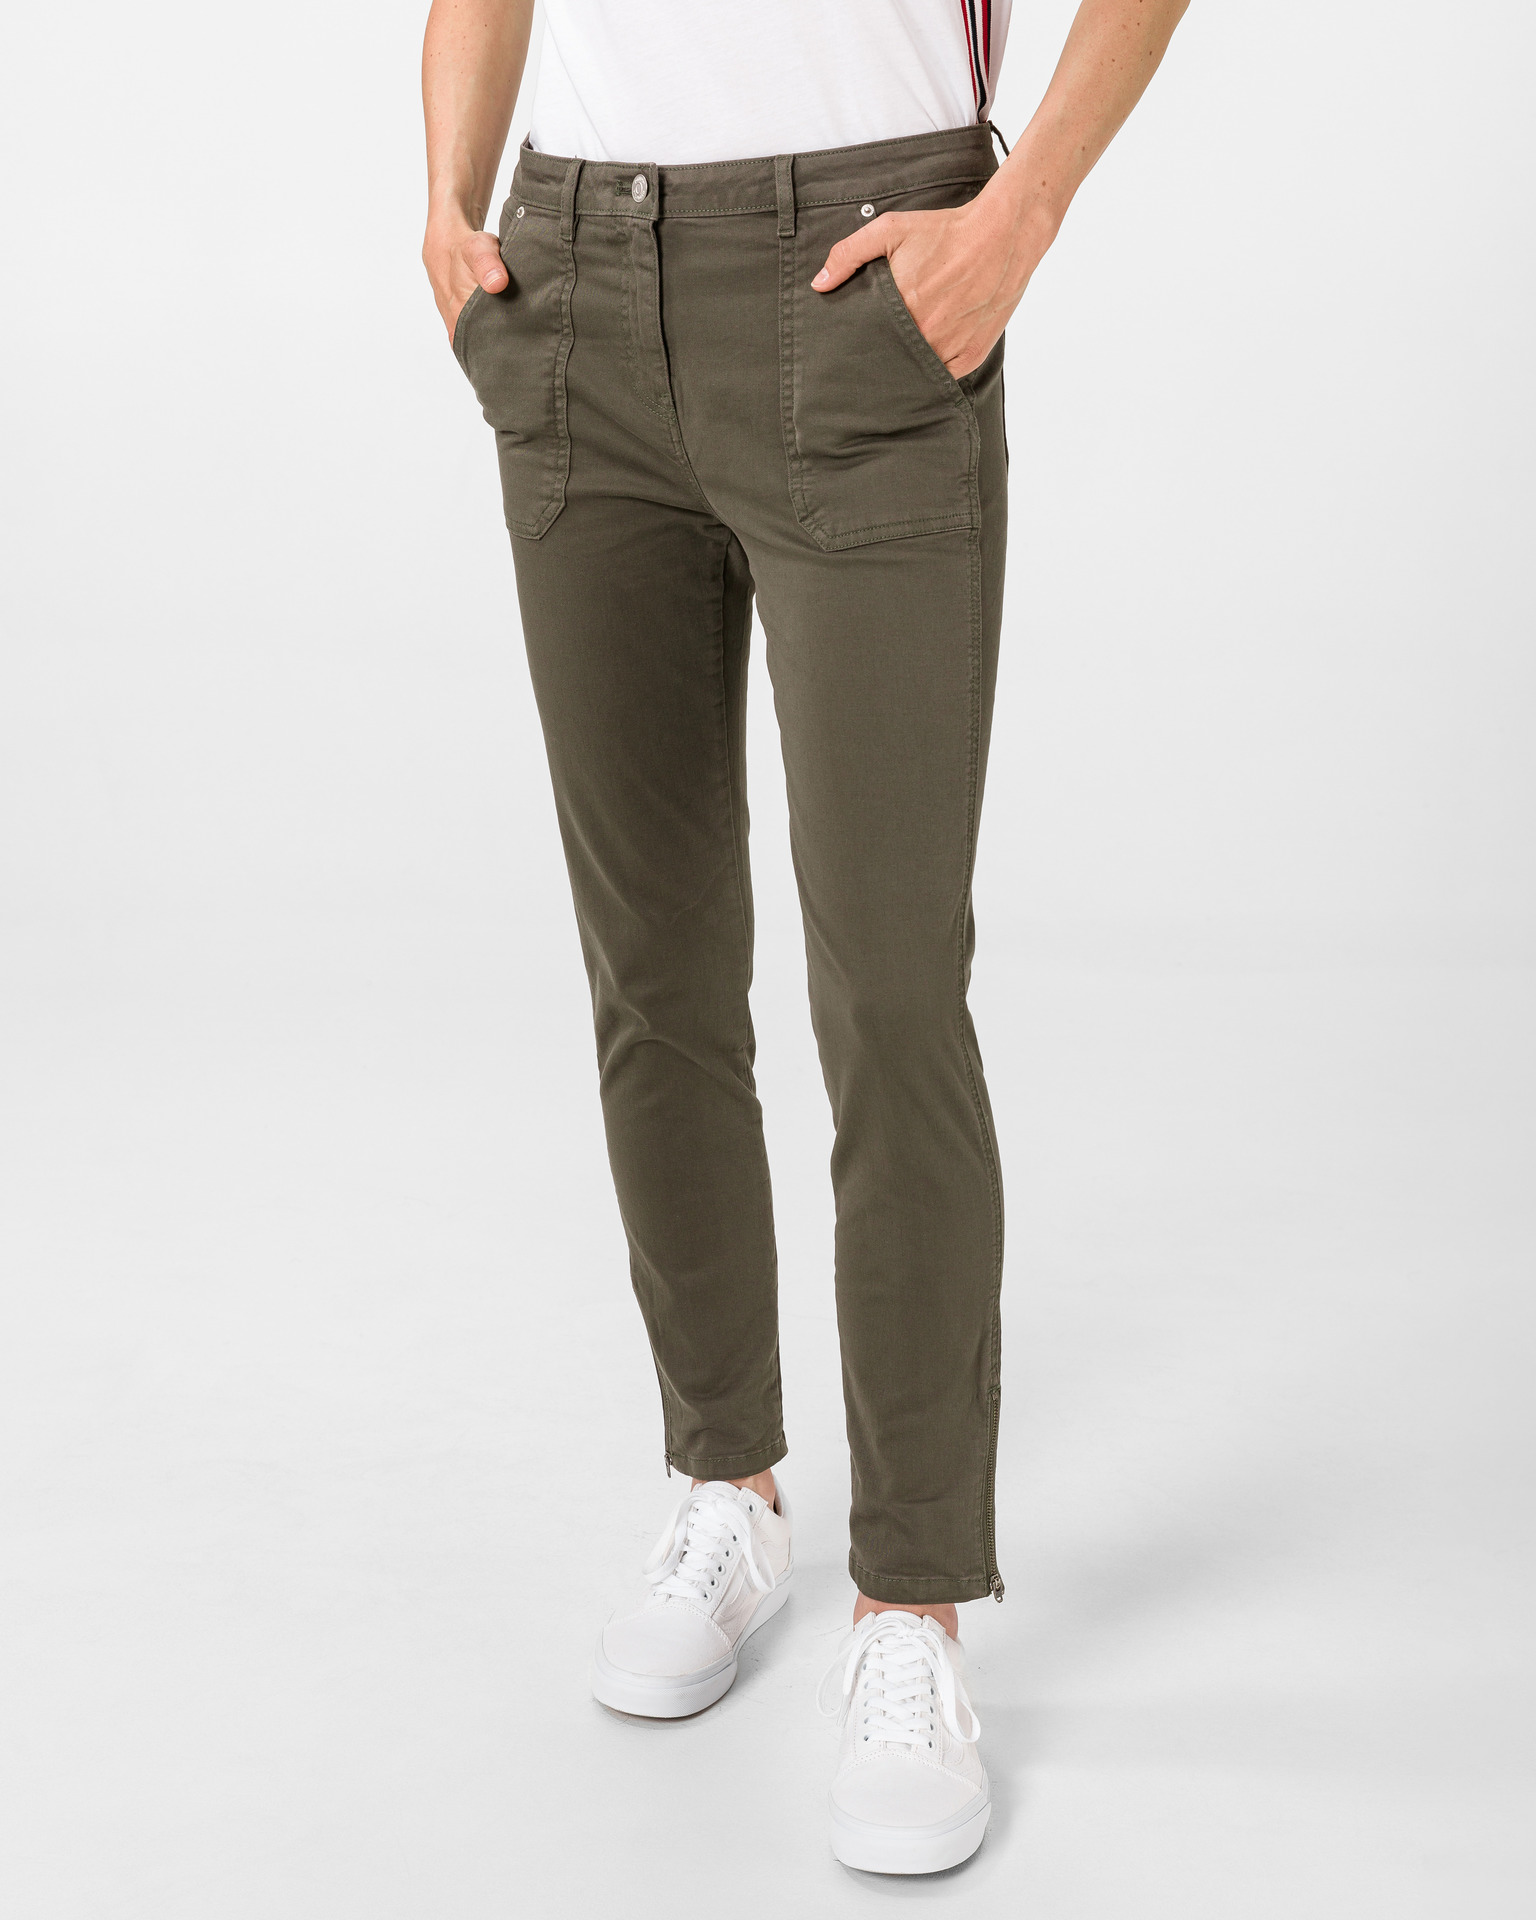 tommy hilfiger combat trousers